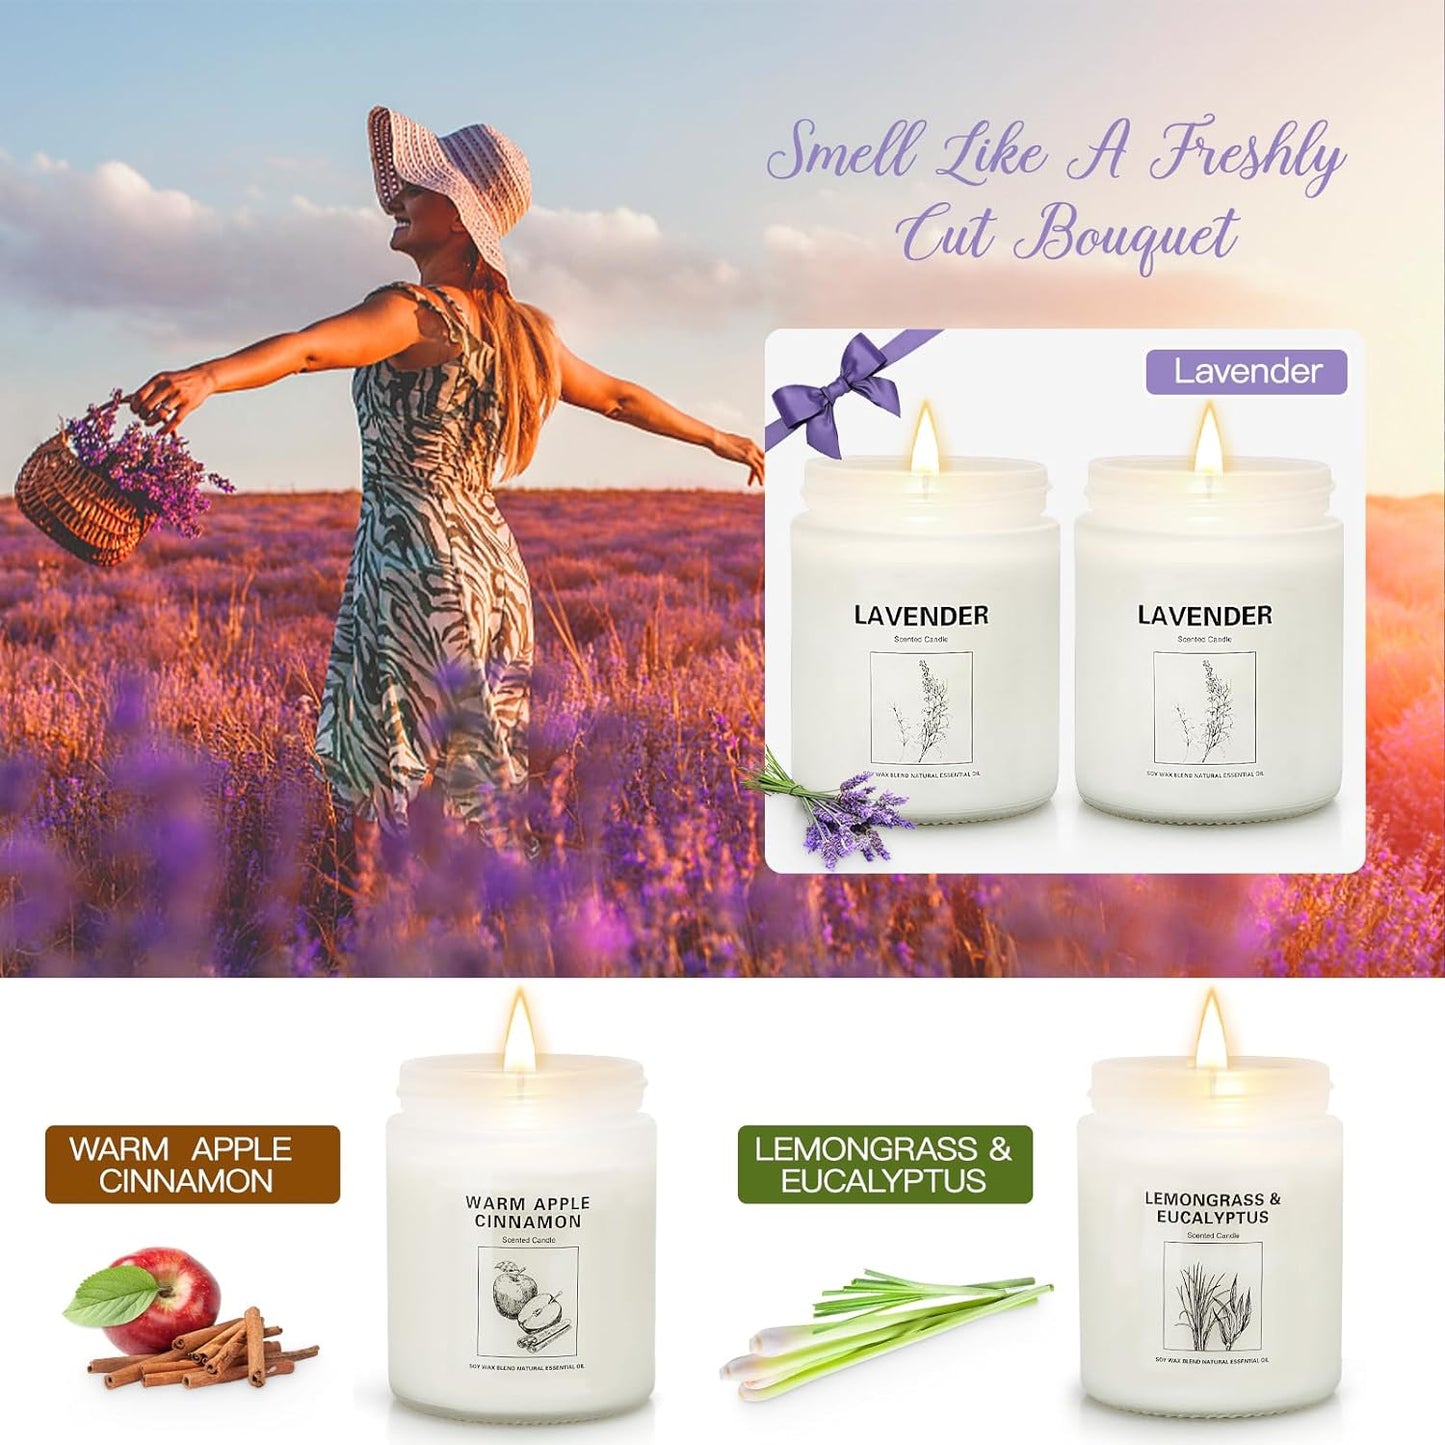 4 Pack Candles for Home Scented, Lavender Candles Gifts Set for Women, 28 oz Aromatherapy Apples Cinnamon Scented Candles for Home 200 Hour Long Lasting Soy Candle for Christmas Birthday